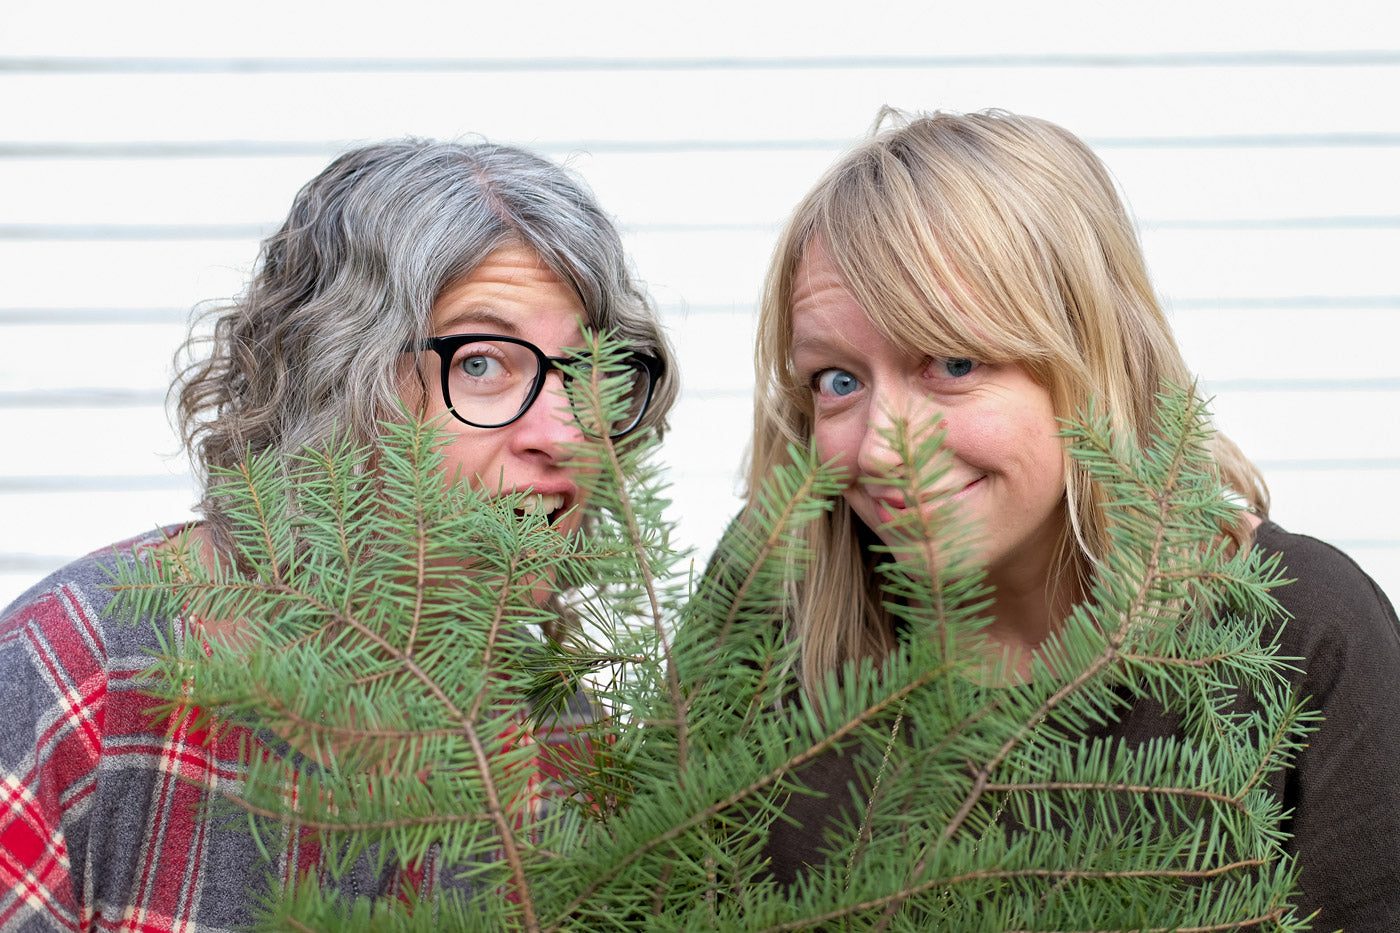 Jaime and Amber peeking out from some greenery